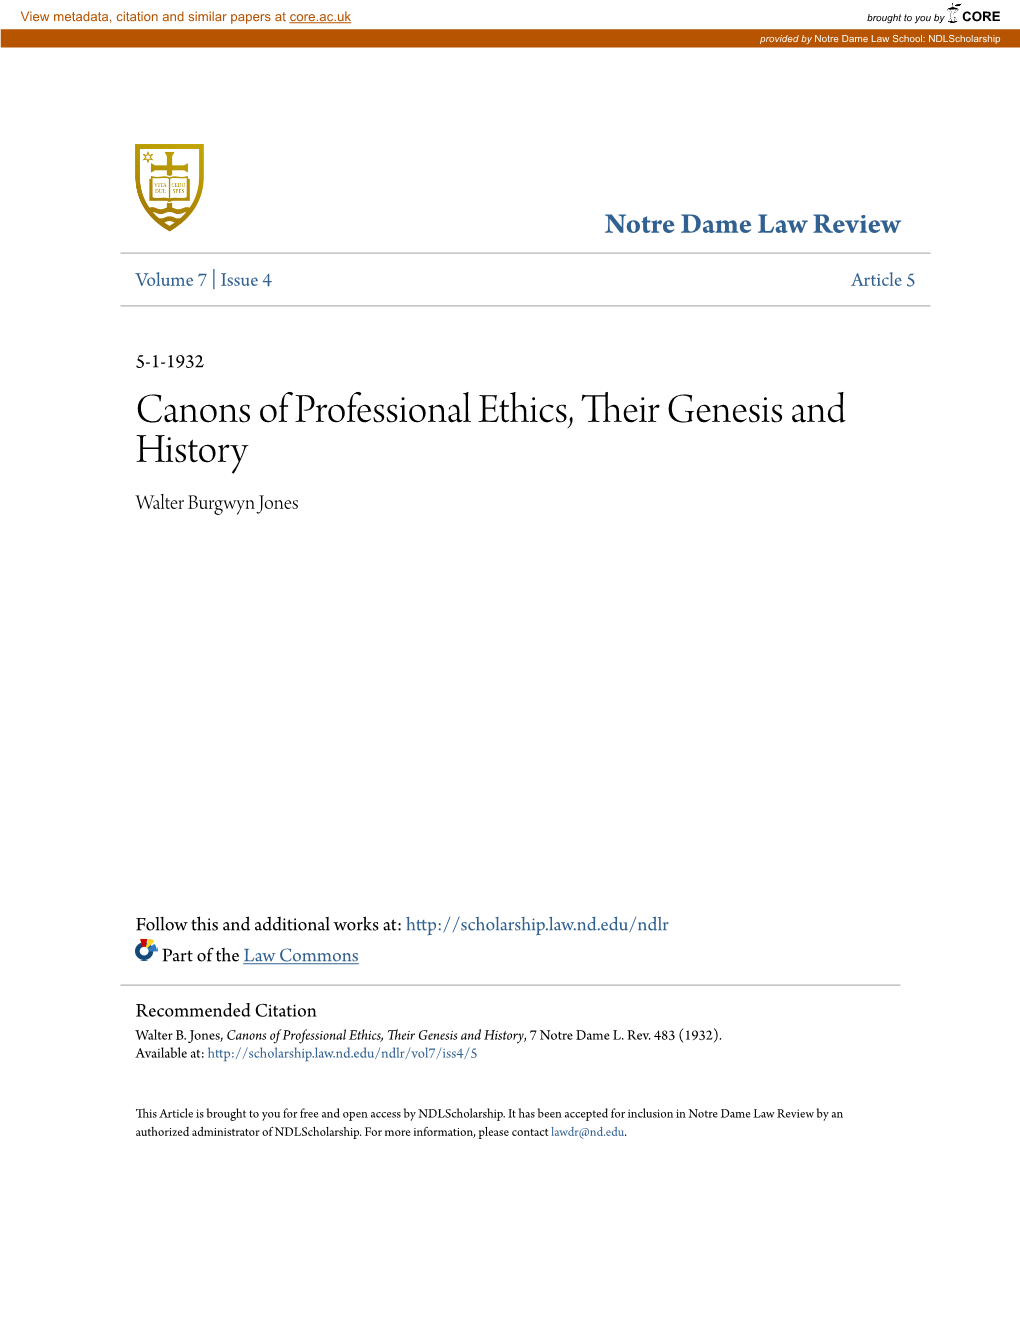 Canons of Professional Ethics, Their Genesis and History Walter Burgwyn Jones